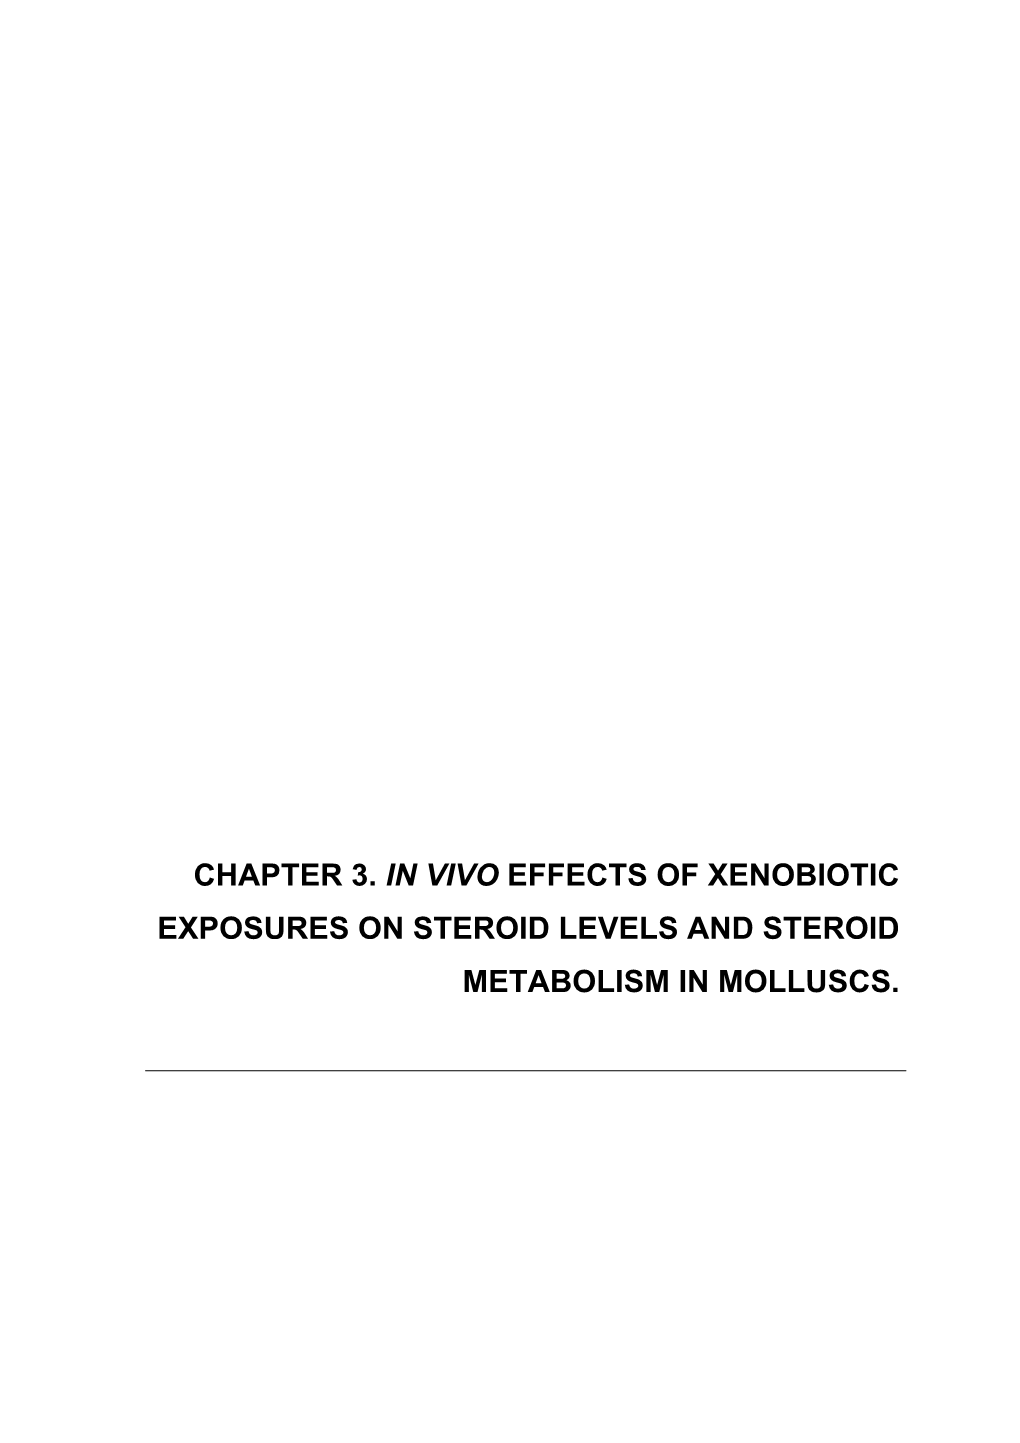 Chapter 3. in Vivo Effects of Xenobiotic Exposures on Steroid Levels and Steroid Metabolism in Molluscs